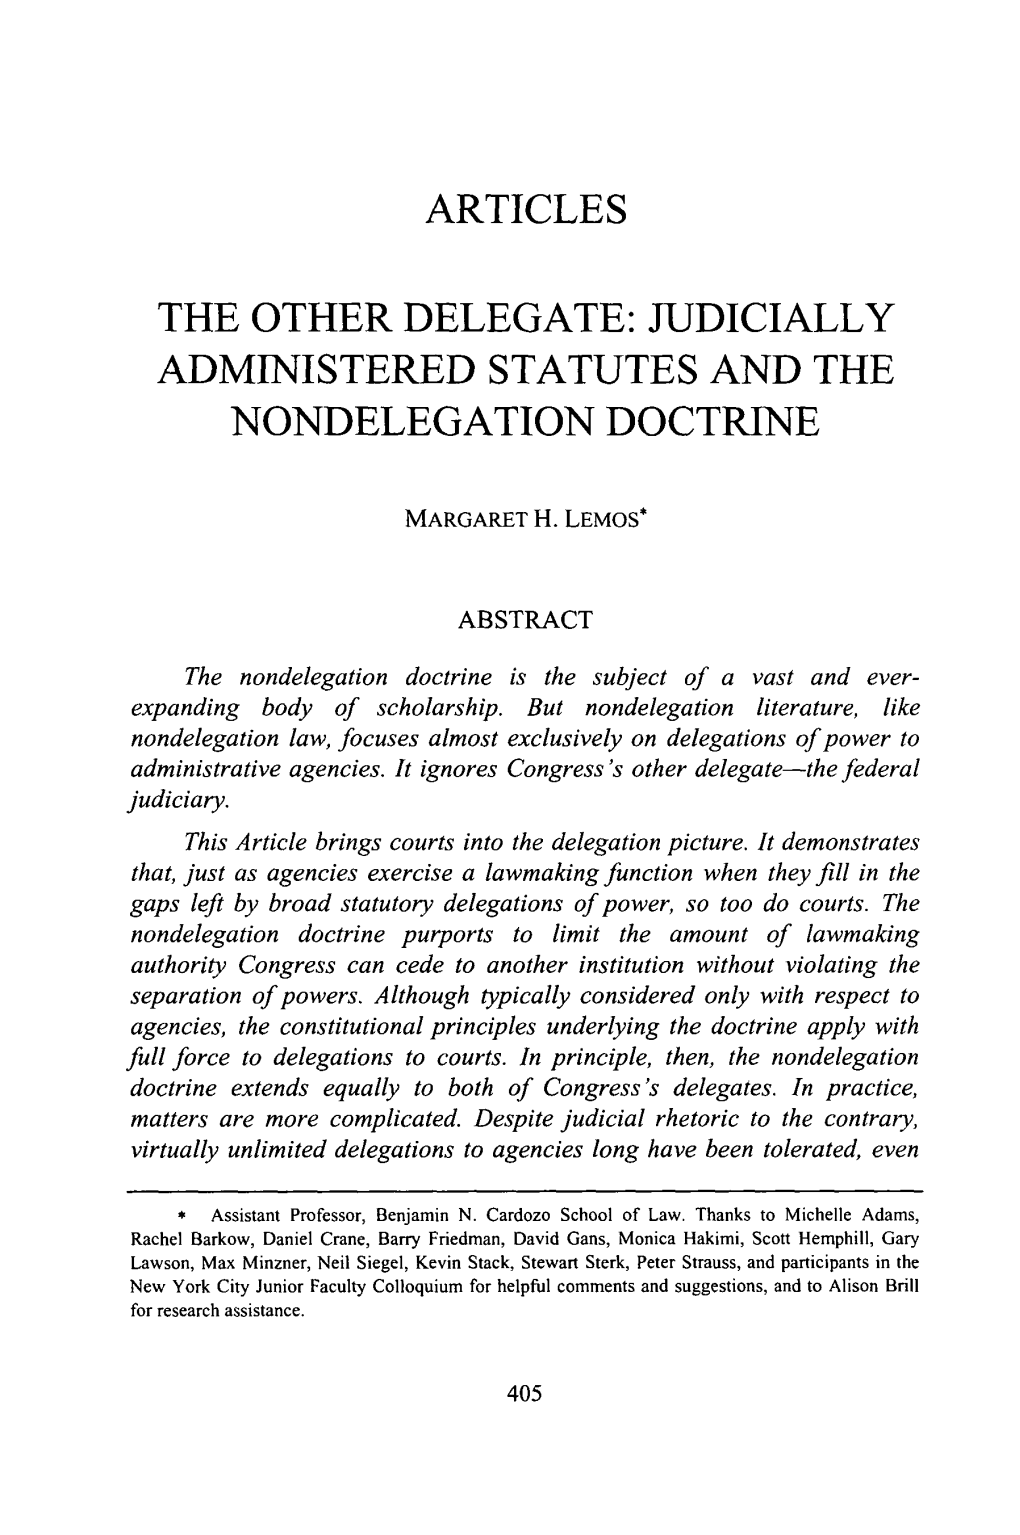 Judicially Administered Statutes and the Nondelegation Doctrine